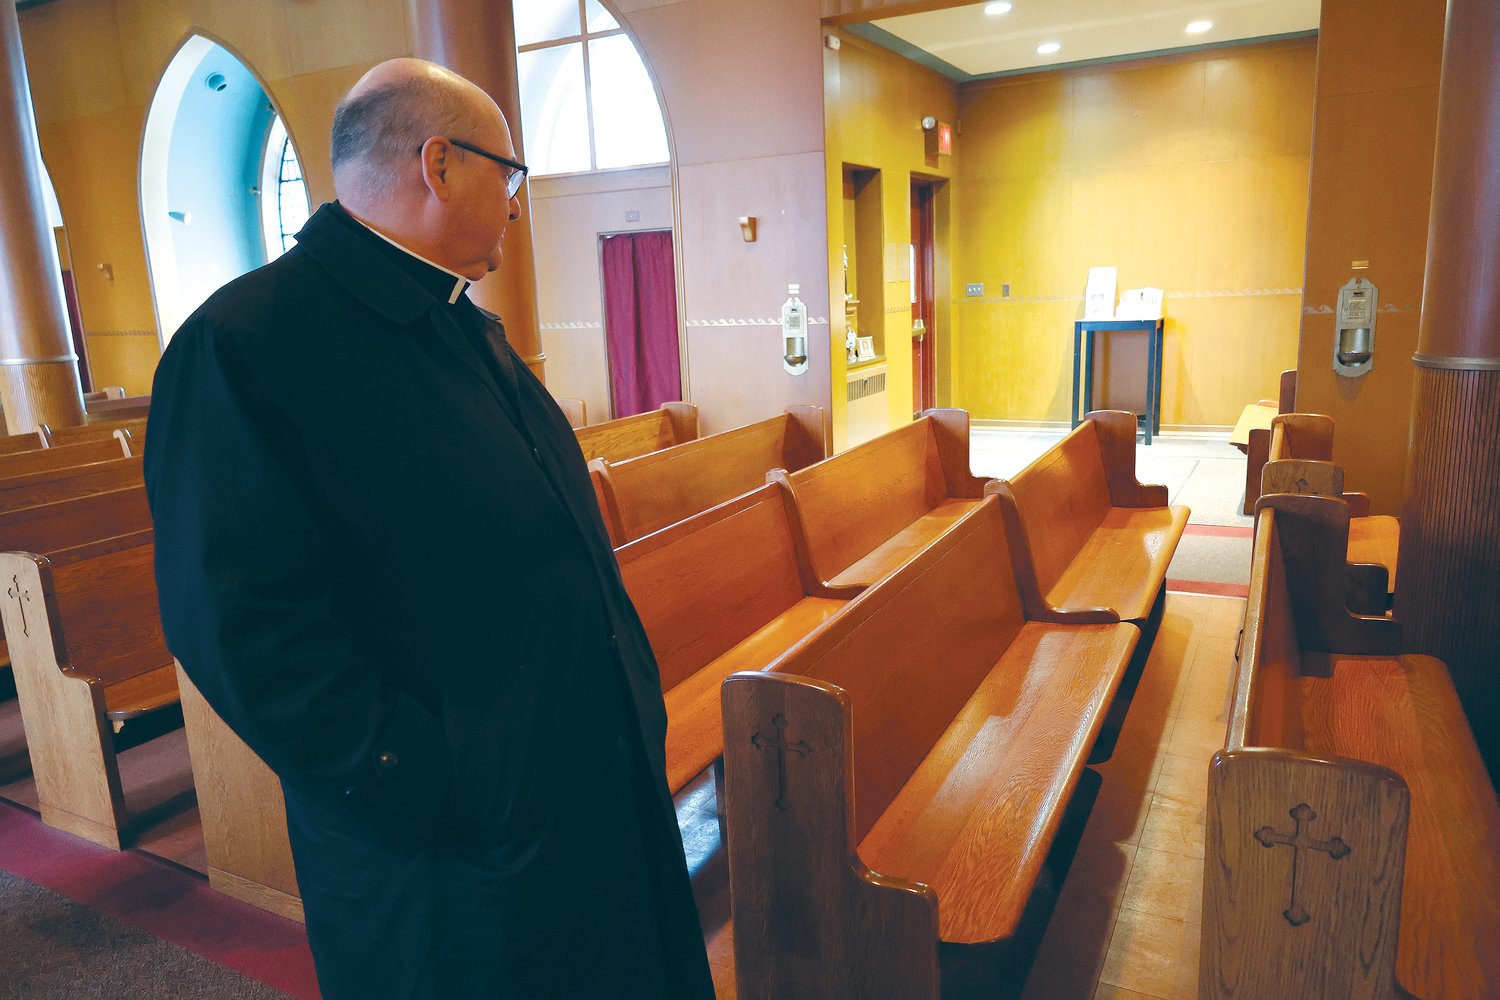 During a visit to Holy Name of Mary Church, Bishop Henning pauses at a pew where his grandparents once sat each week as they participated in Sunday Mass.